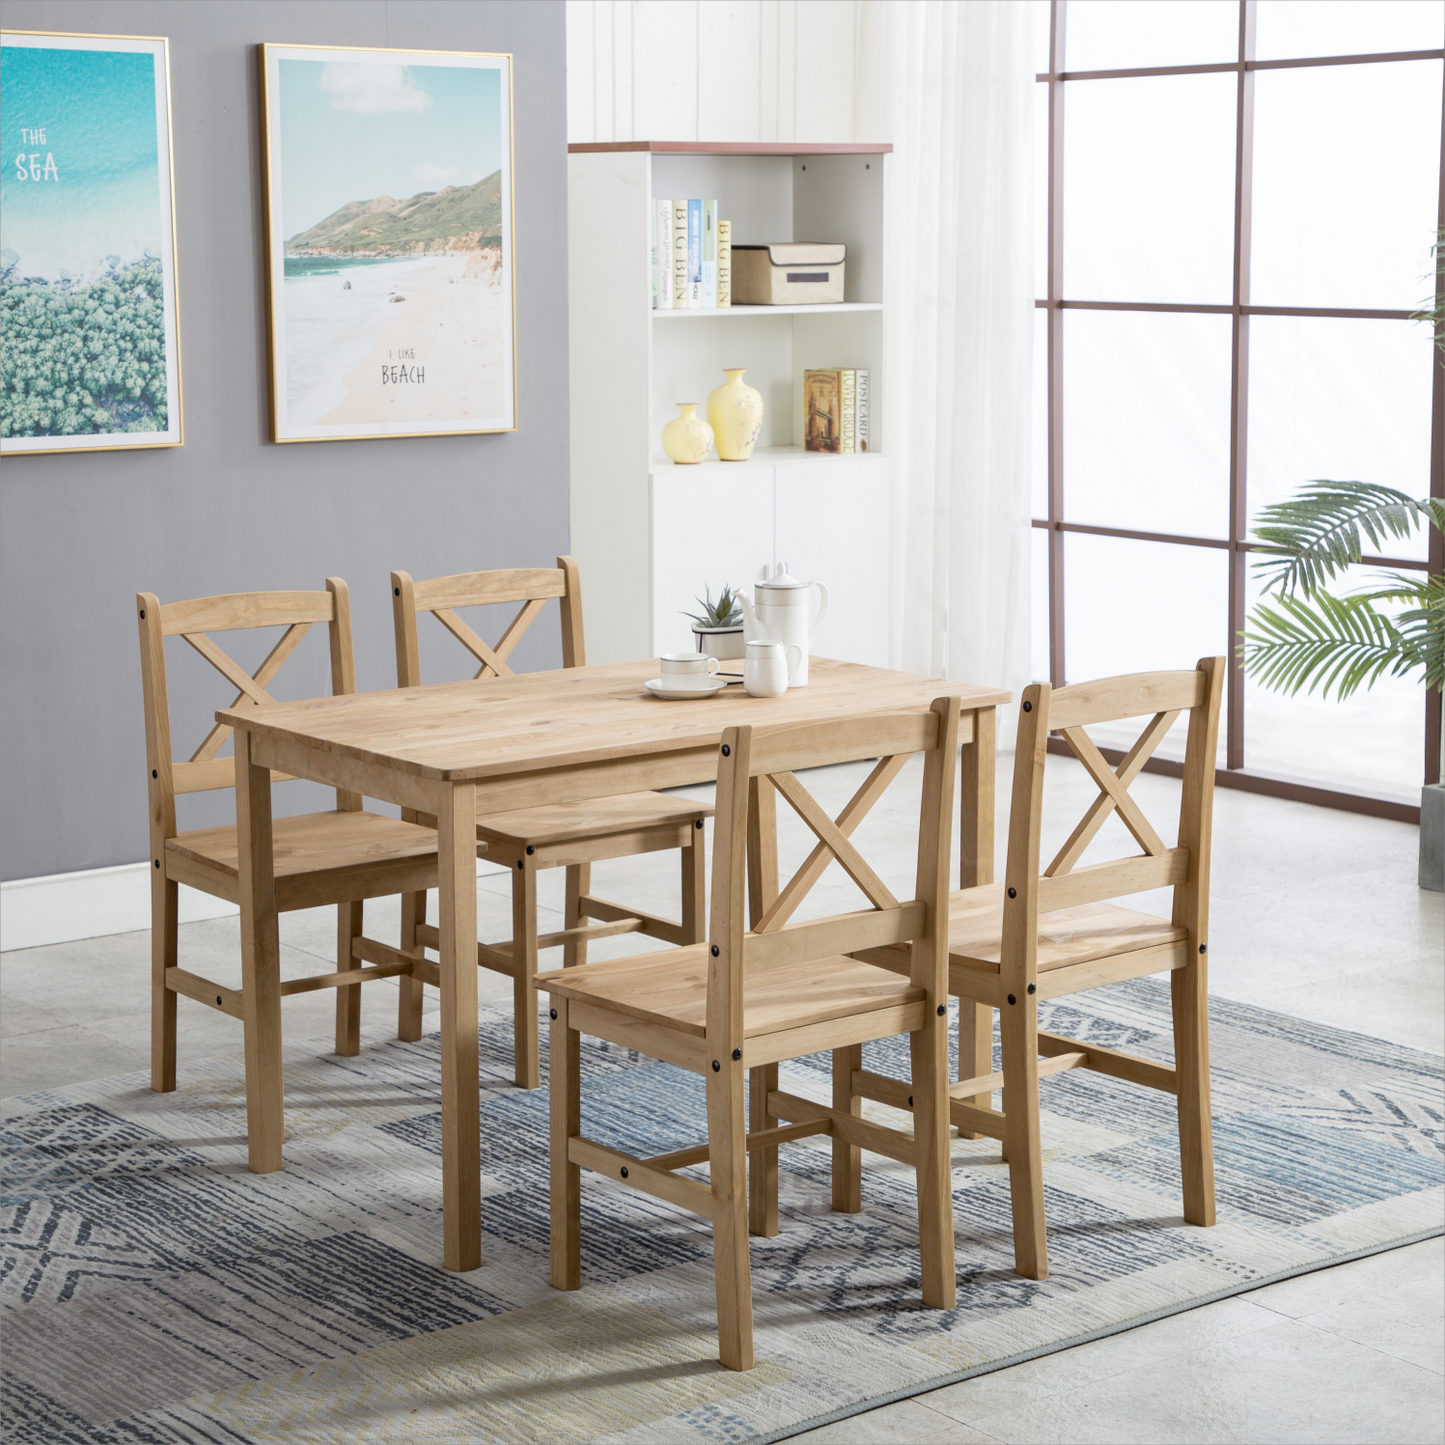 Classic Solid Wooden Dining Table and 4 Chairs Set